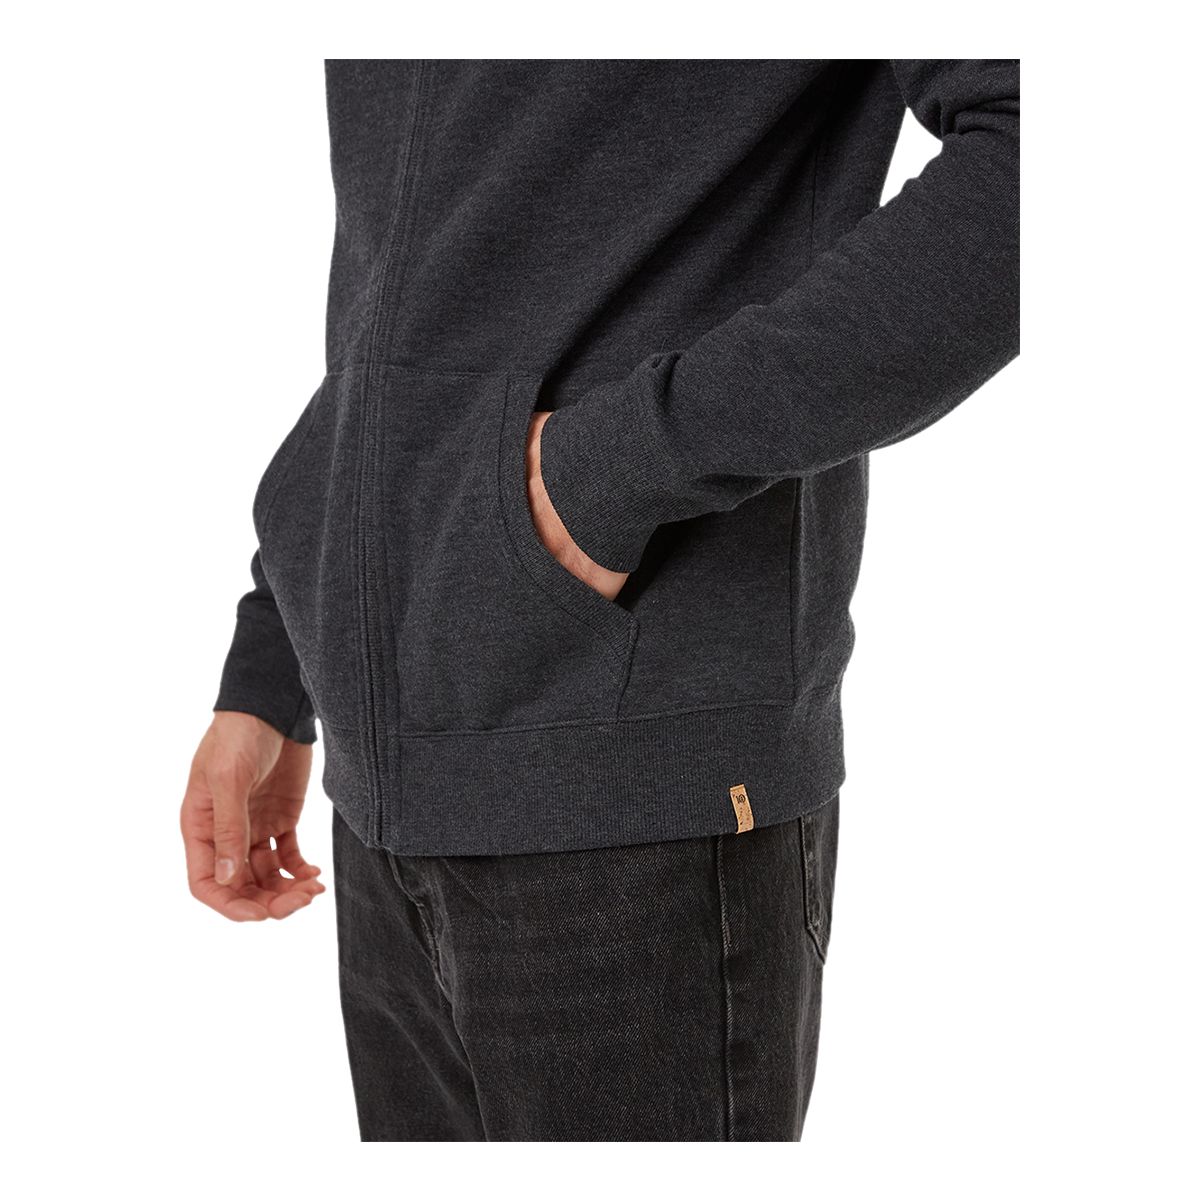 Tentree Men's Stretch Twill Relaxed Fit Cargo Jogger